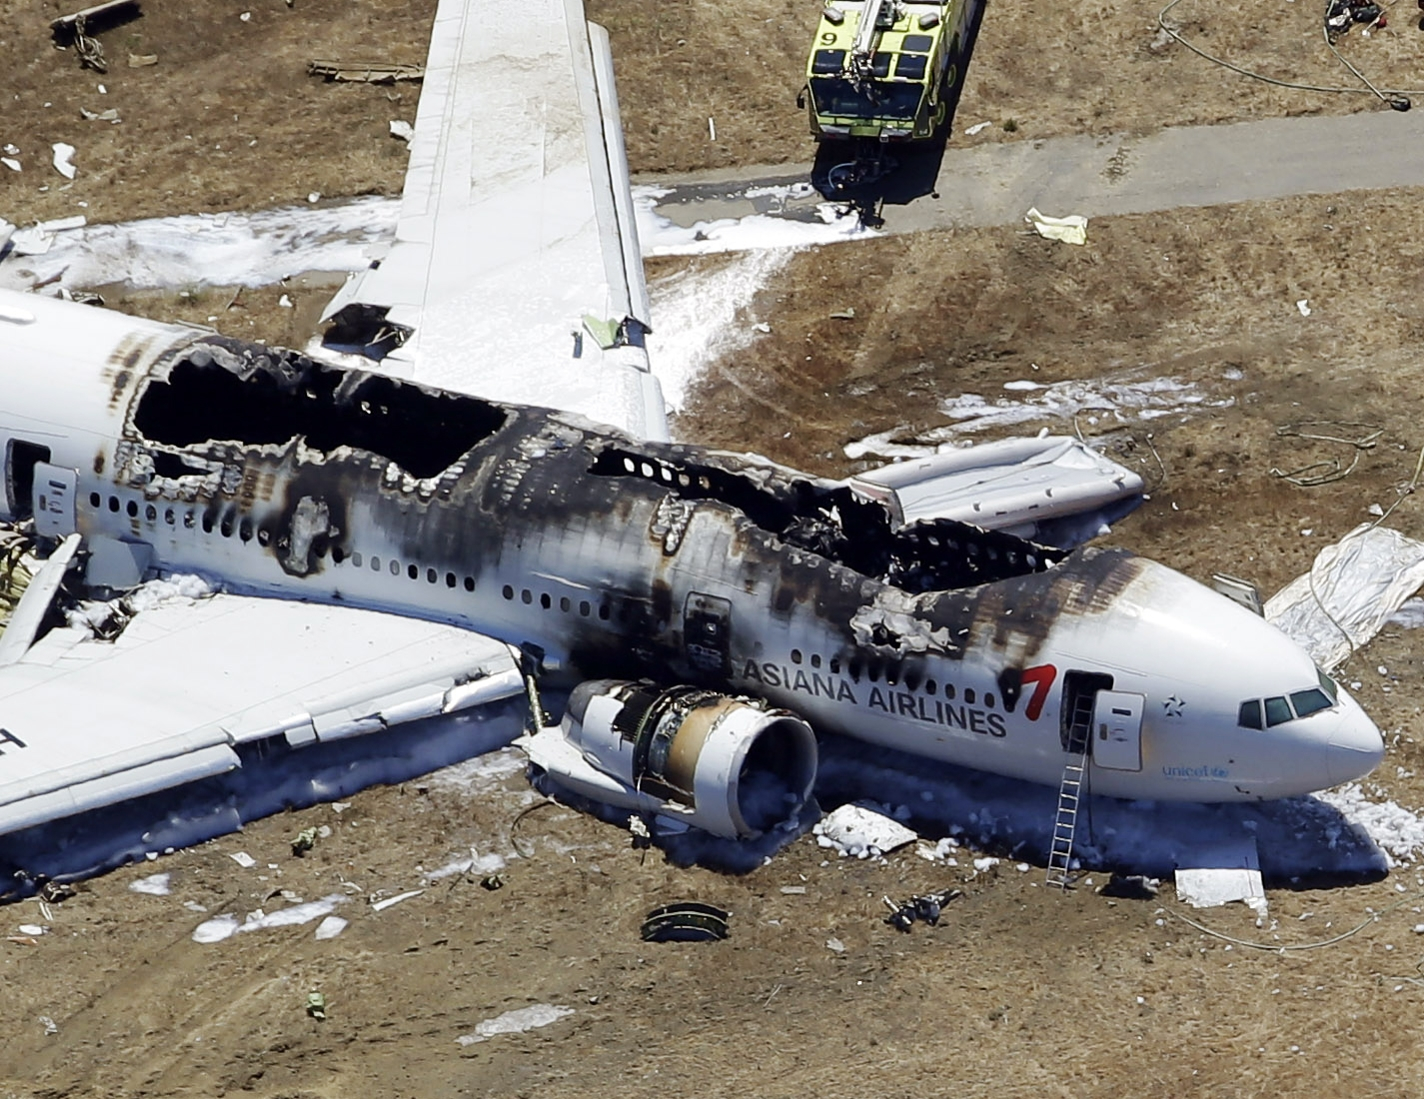 Wreckage of the Asiana Flight 214 airplane after it crashed at the San Francisco International Airport. Photo: AP